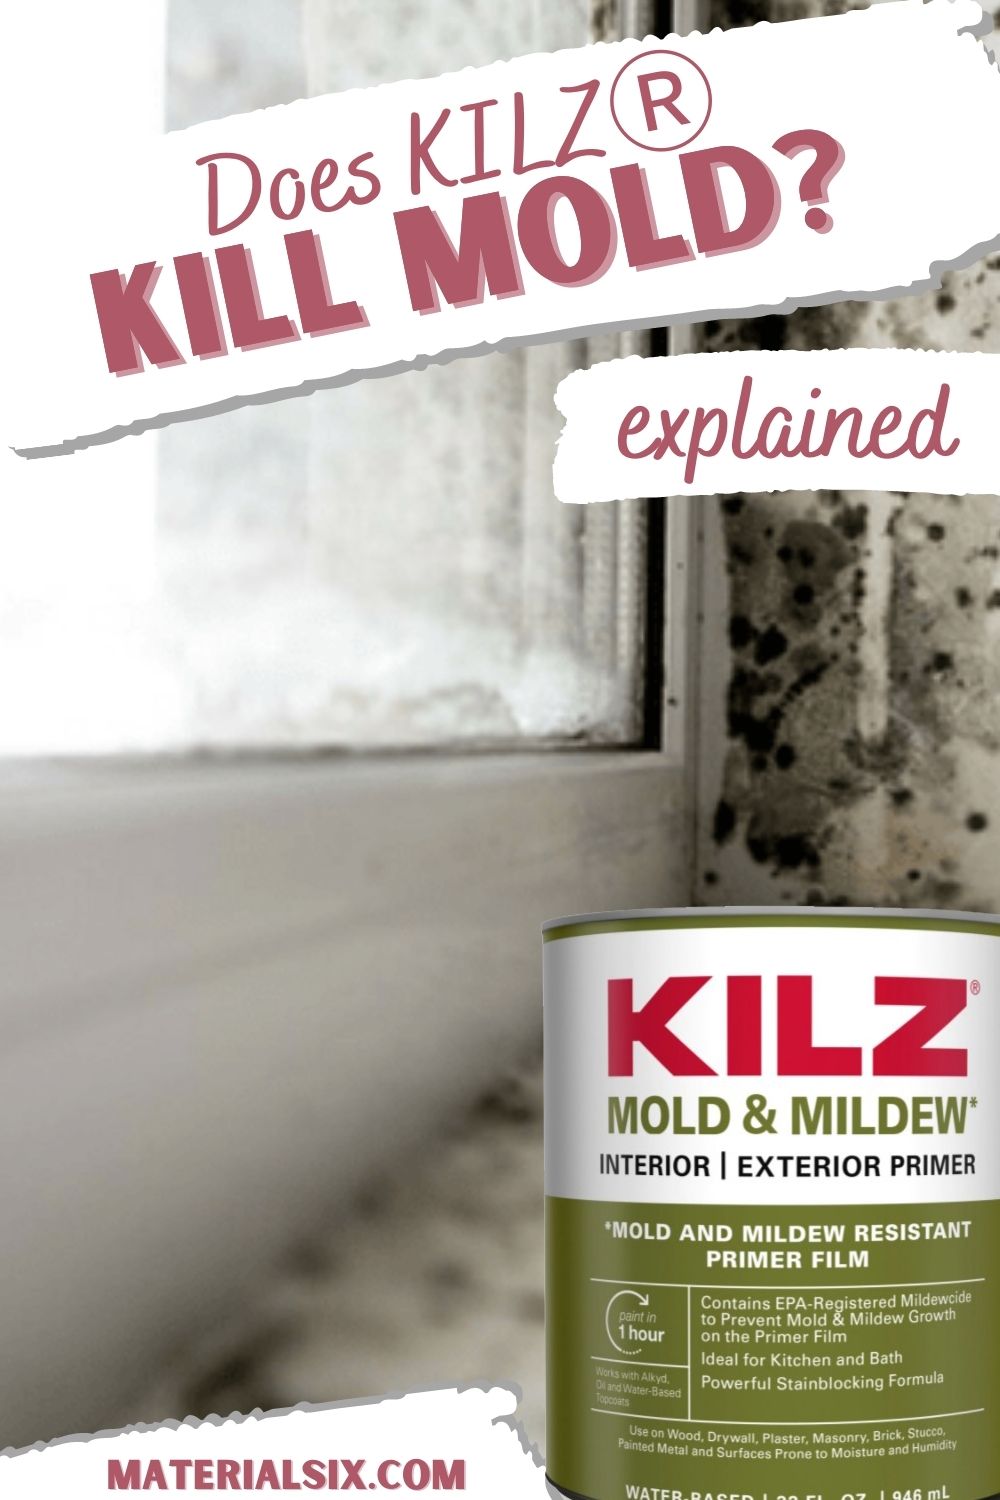 How to Use Kilz to Kill Mold & Mildew in Your Home?